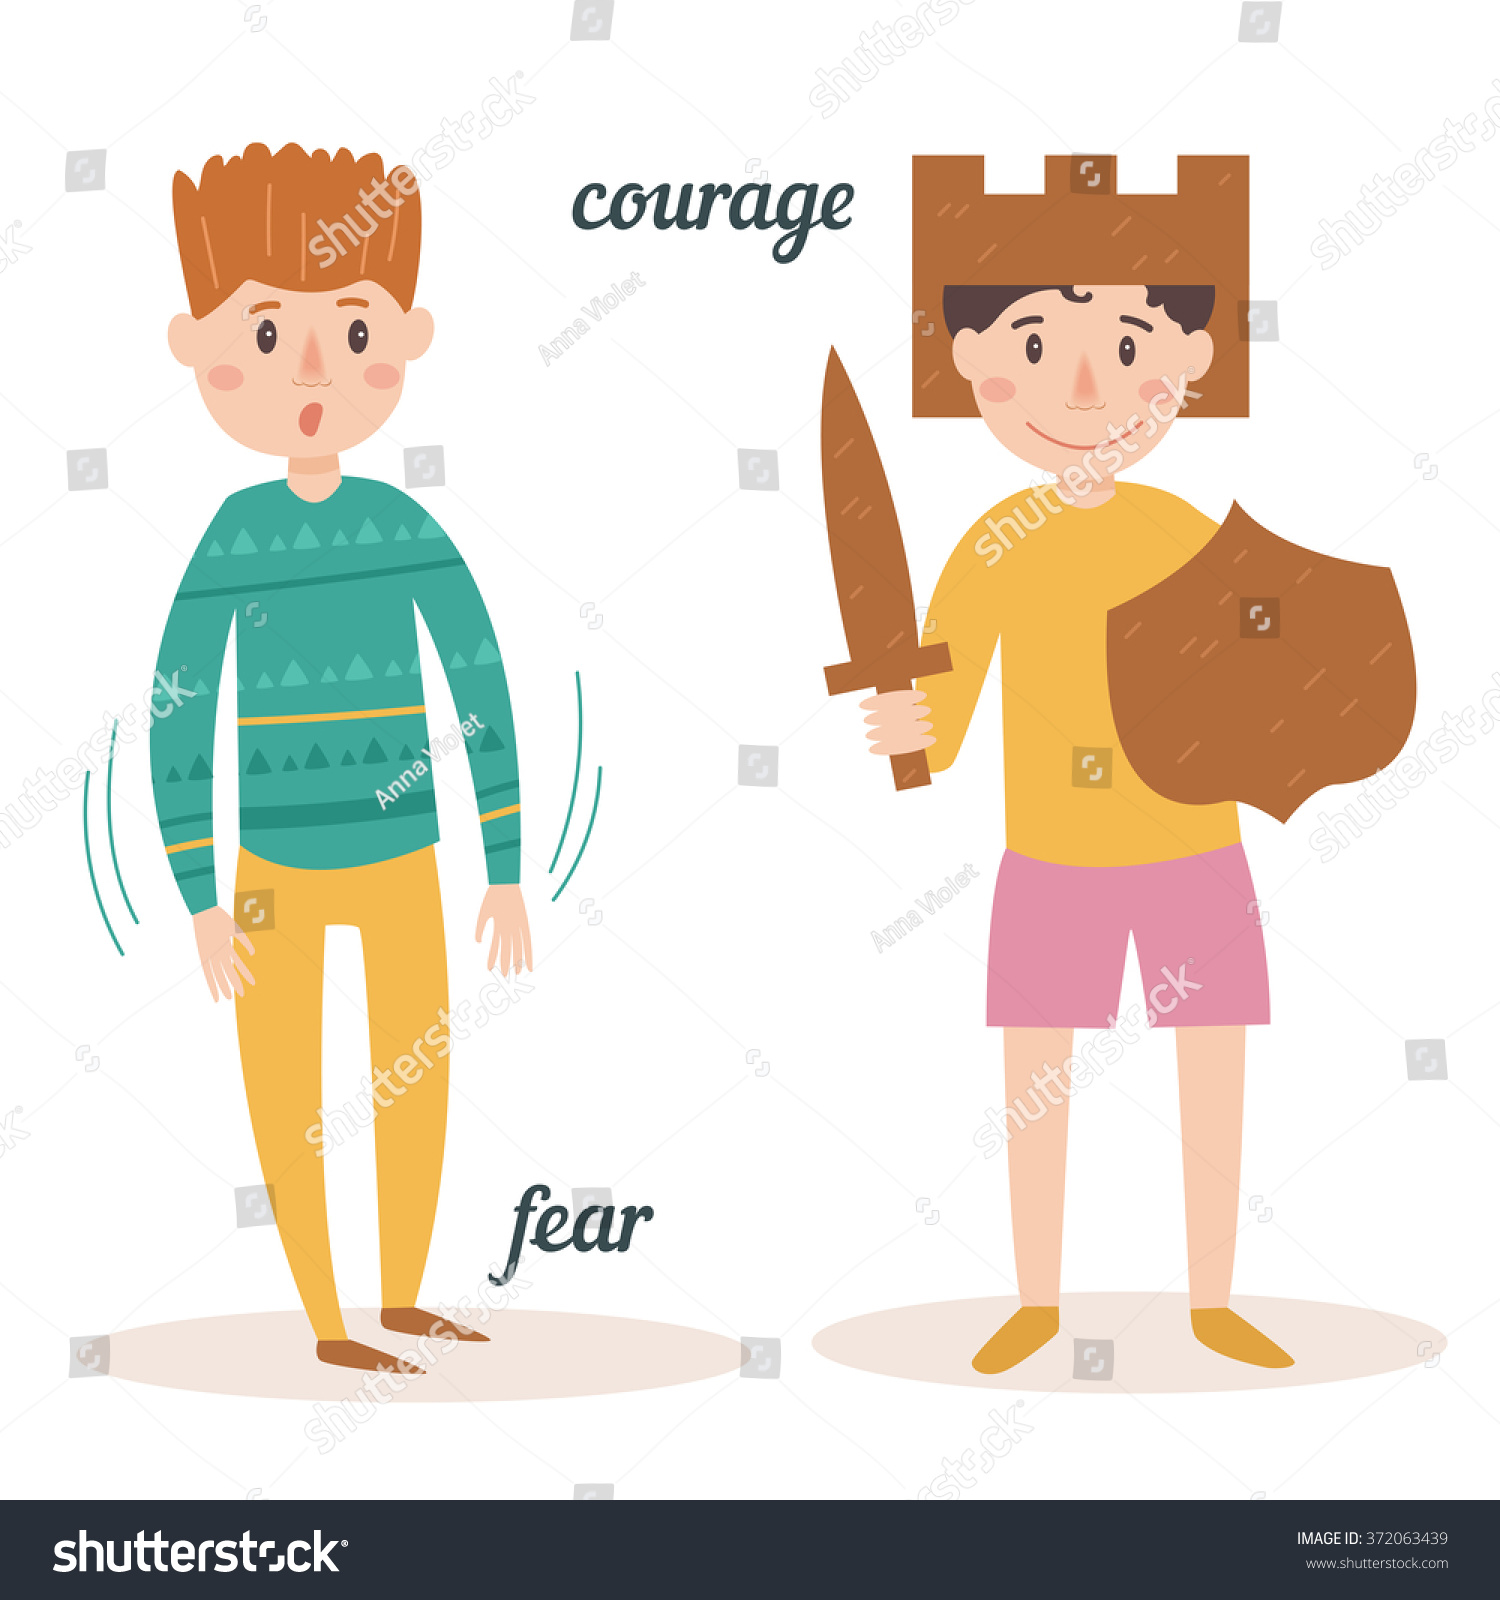 courage clipart illustrations - photo #15